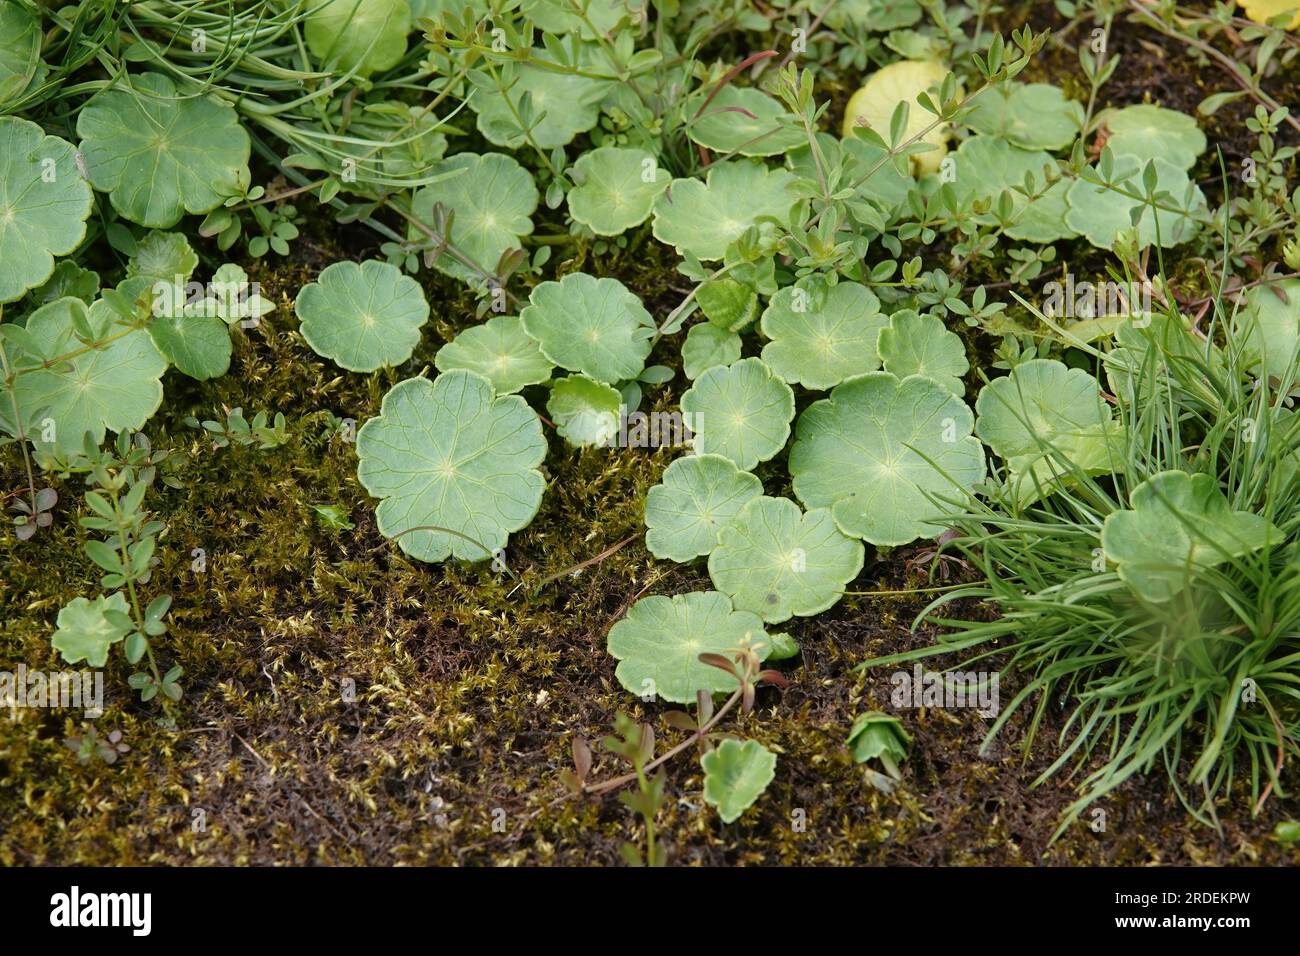 Natural closeup on the round leaved pennywort marsh plant, Hydrocotyle vulgaris, at the border of a pond Stock Photo